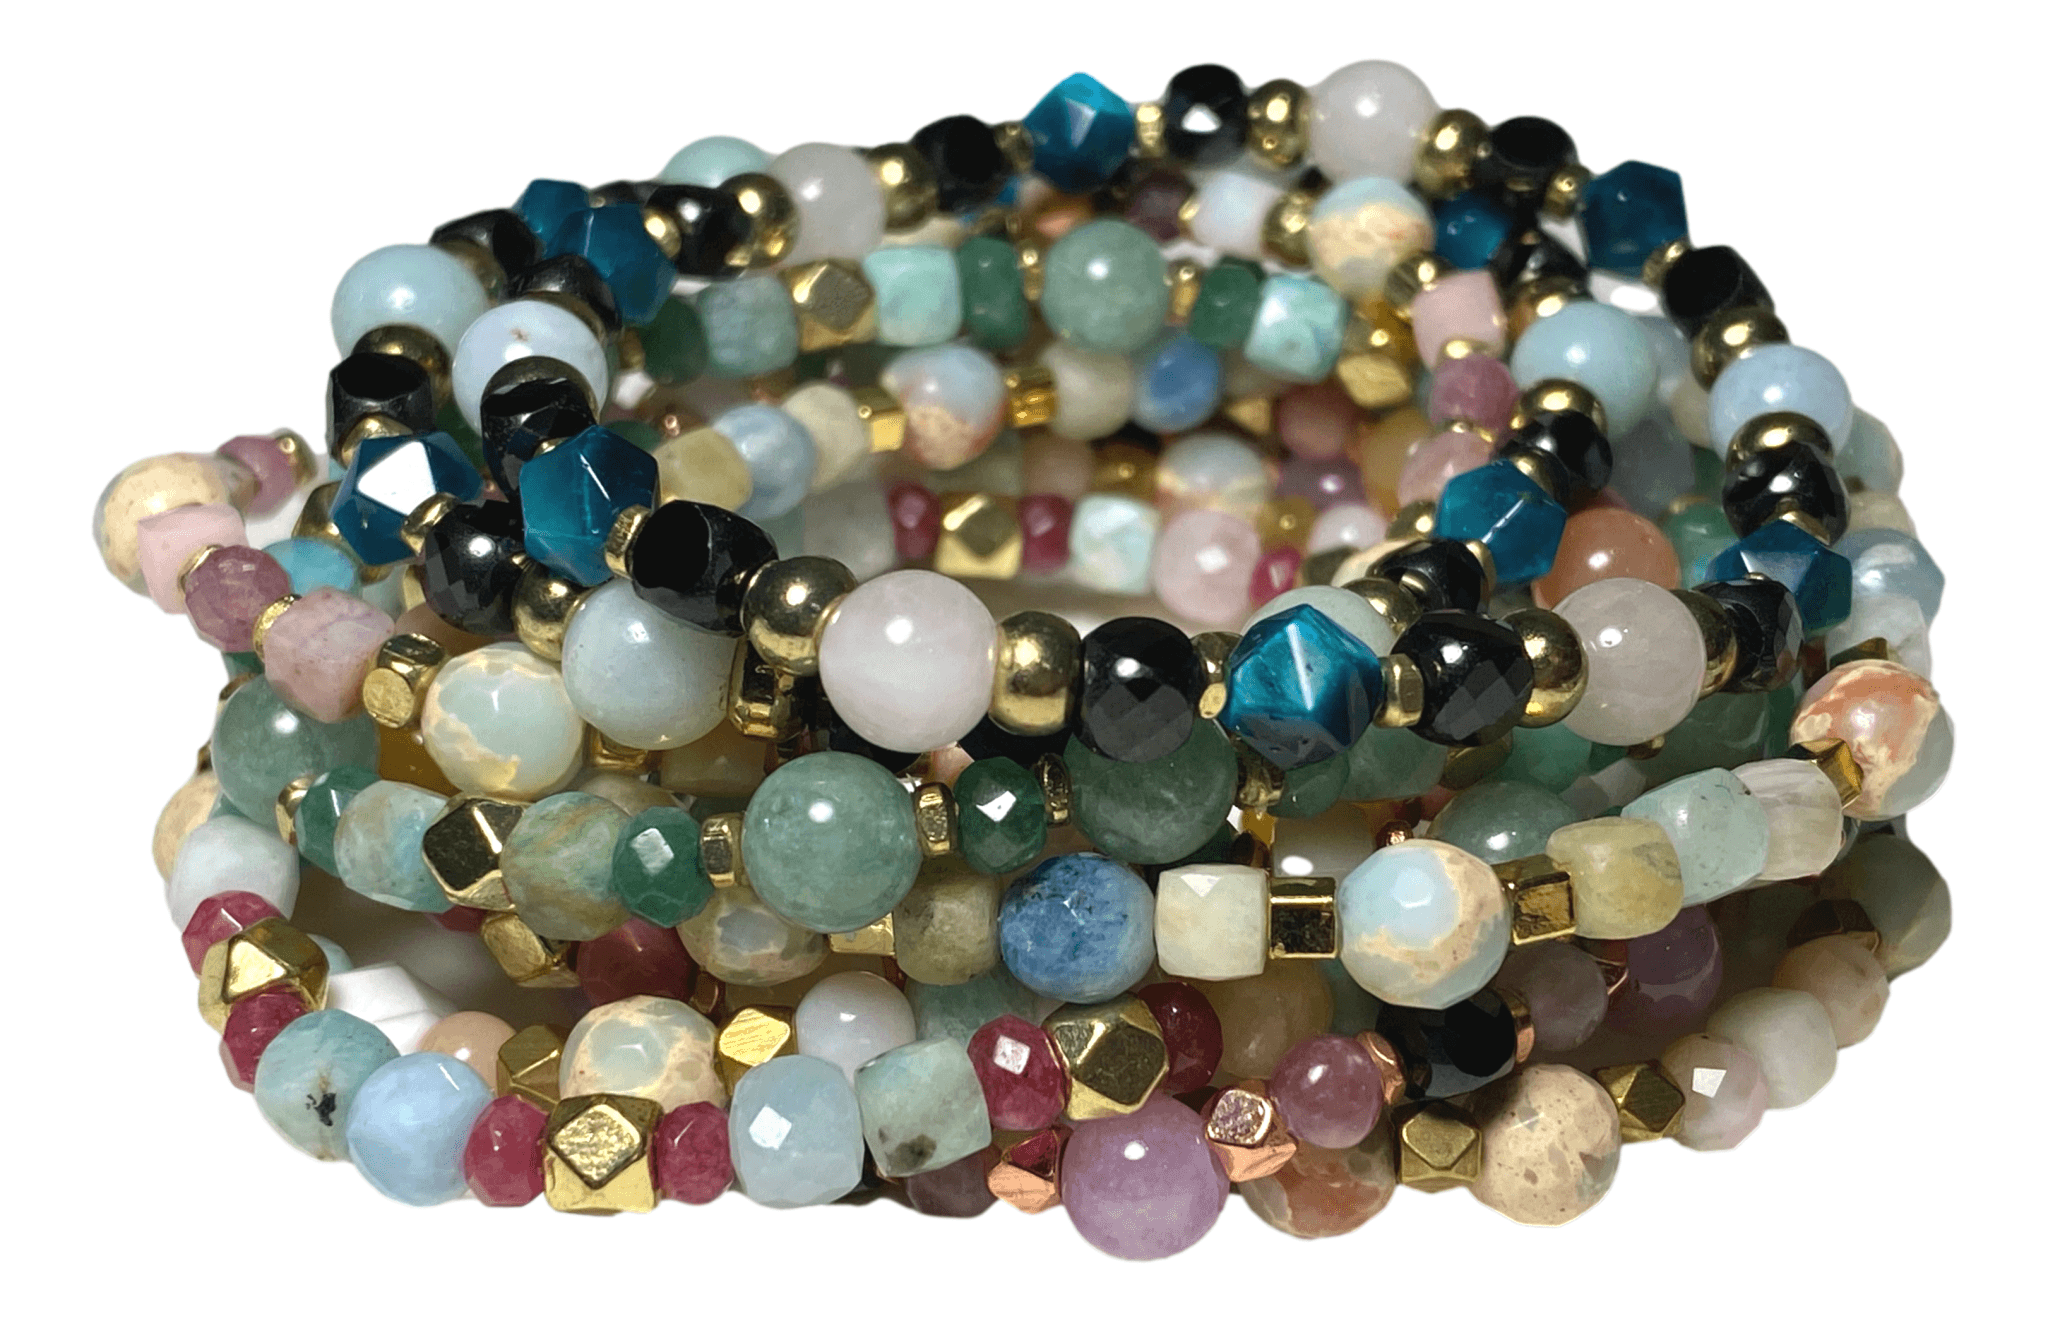 Bracelet Stretch Assorted Colorful Beads Semi-precious Stonestyles Select a Saint Handmade by Skilled Artisan 2 1/2 W Inches - Ysleta Mission Gift Shop- VOTED El Paso's Best Gift Shop